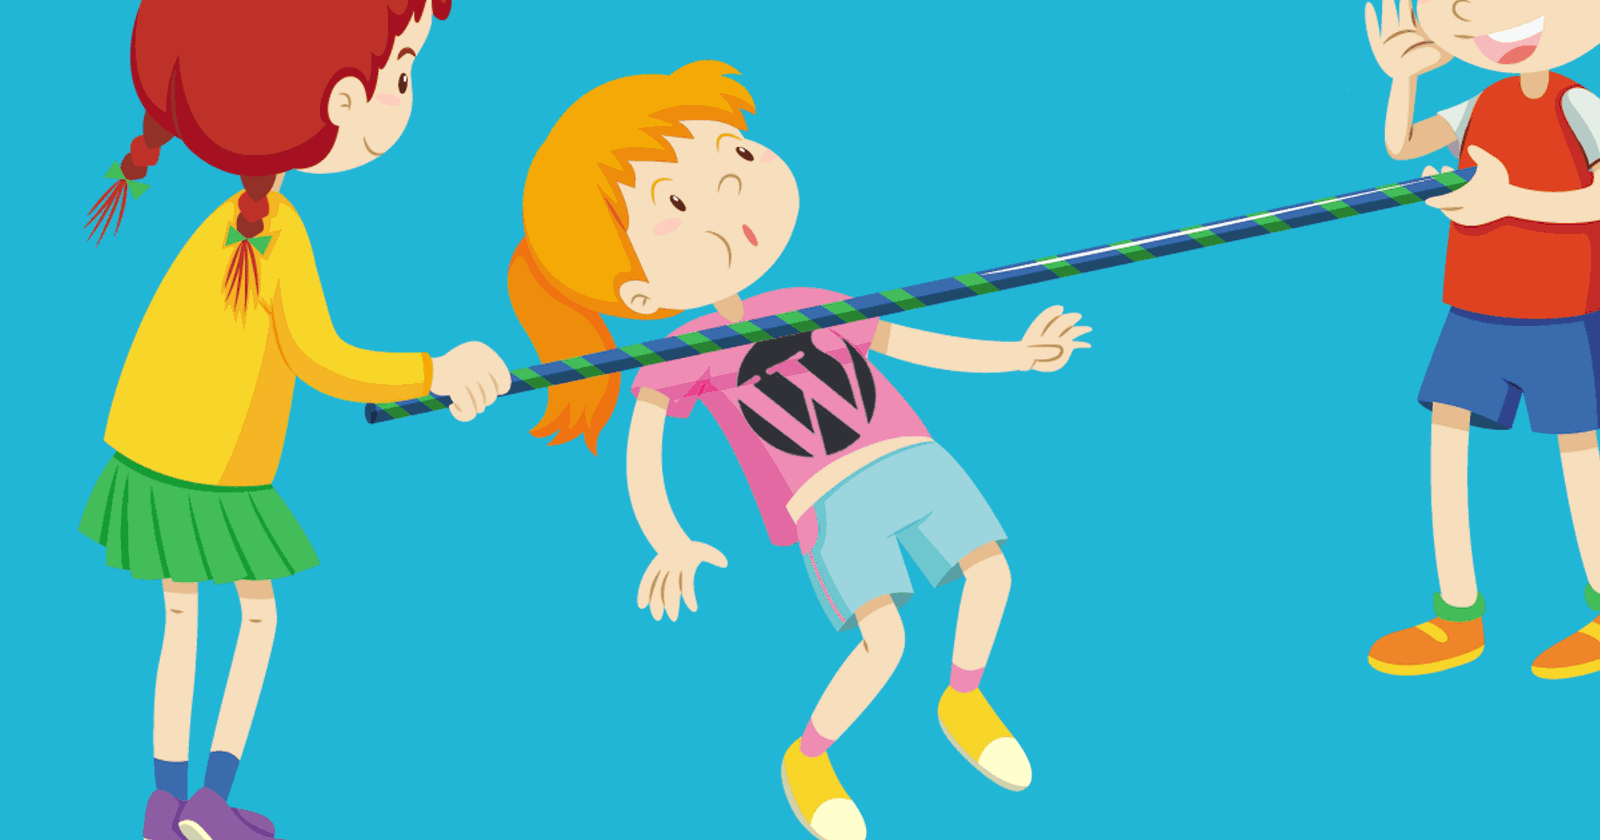 Image of child symbolizing Wordpress who is doing a limbo, a metaphor for the state of limbo